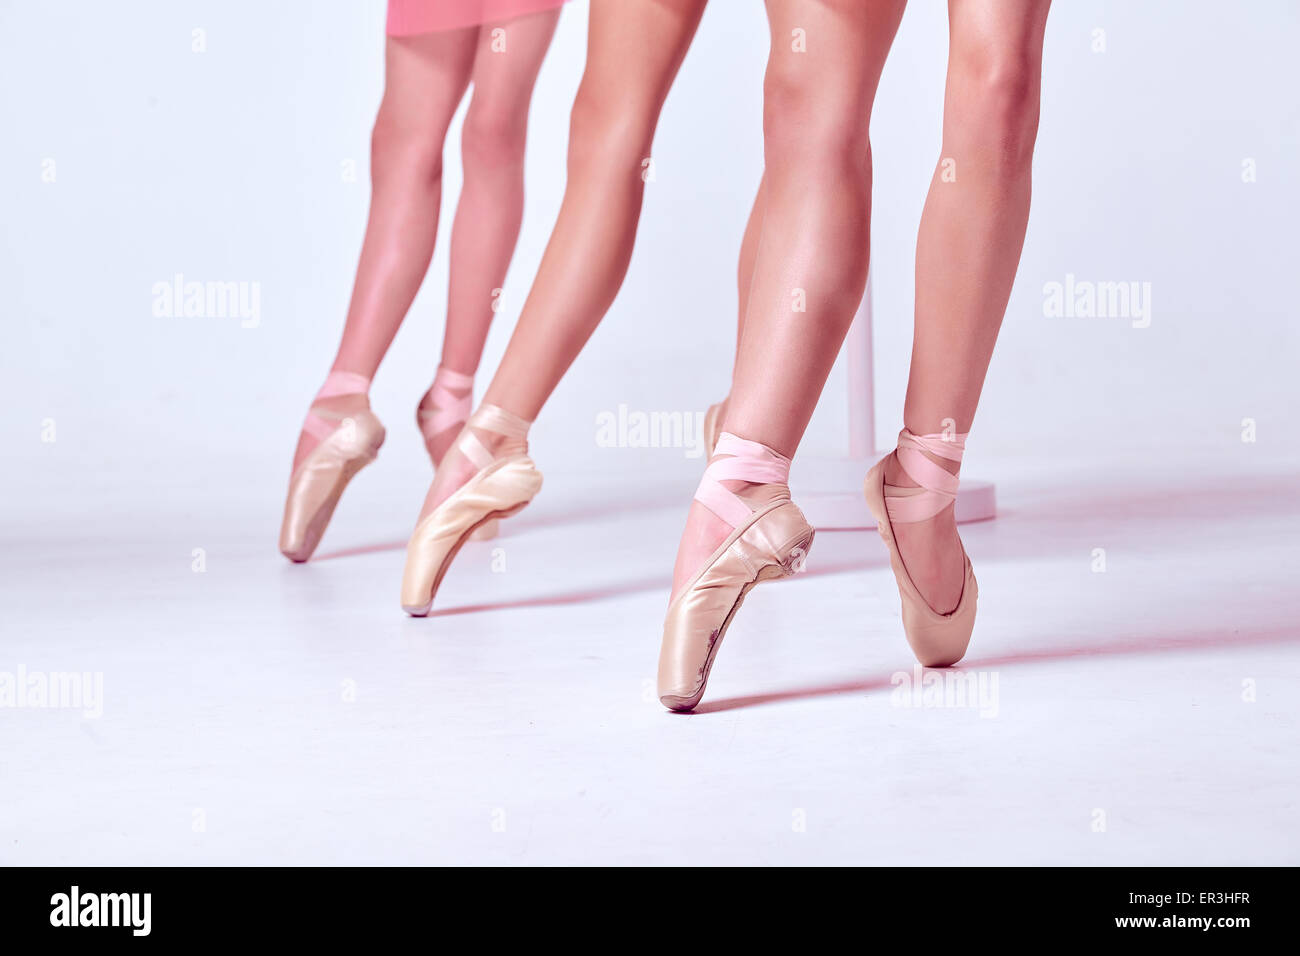 The feet of a young ballerinas in pointe shoes Stock Photo